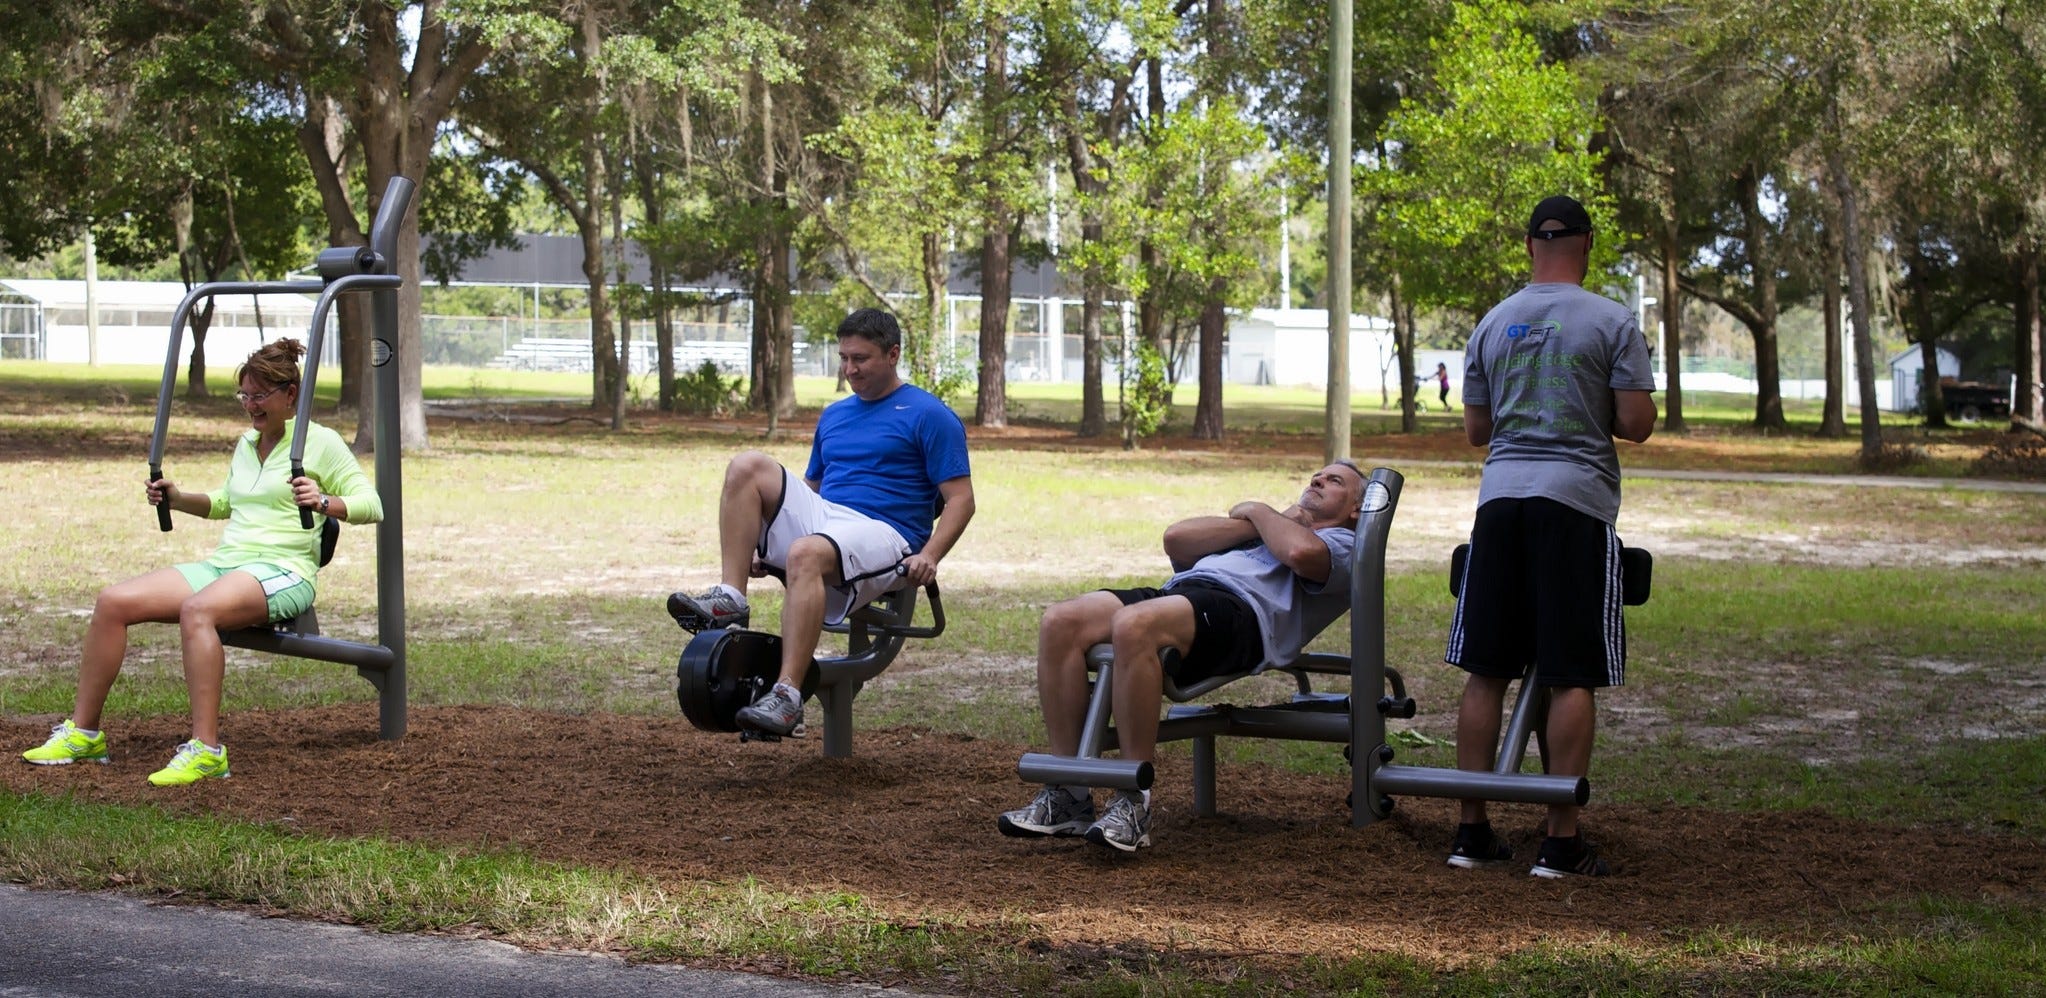 Outdoor Fitness Equipment Gives Everyone a Chance to Exercise